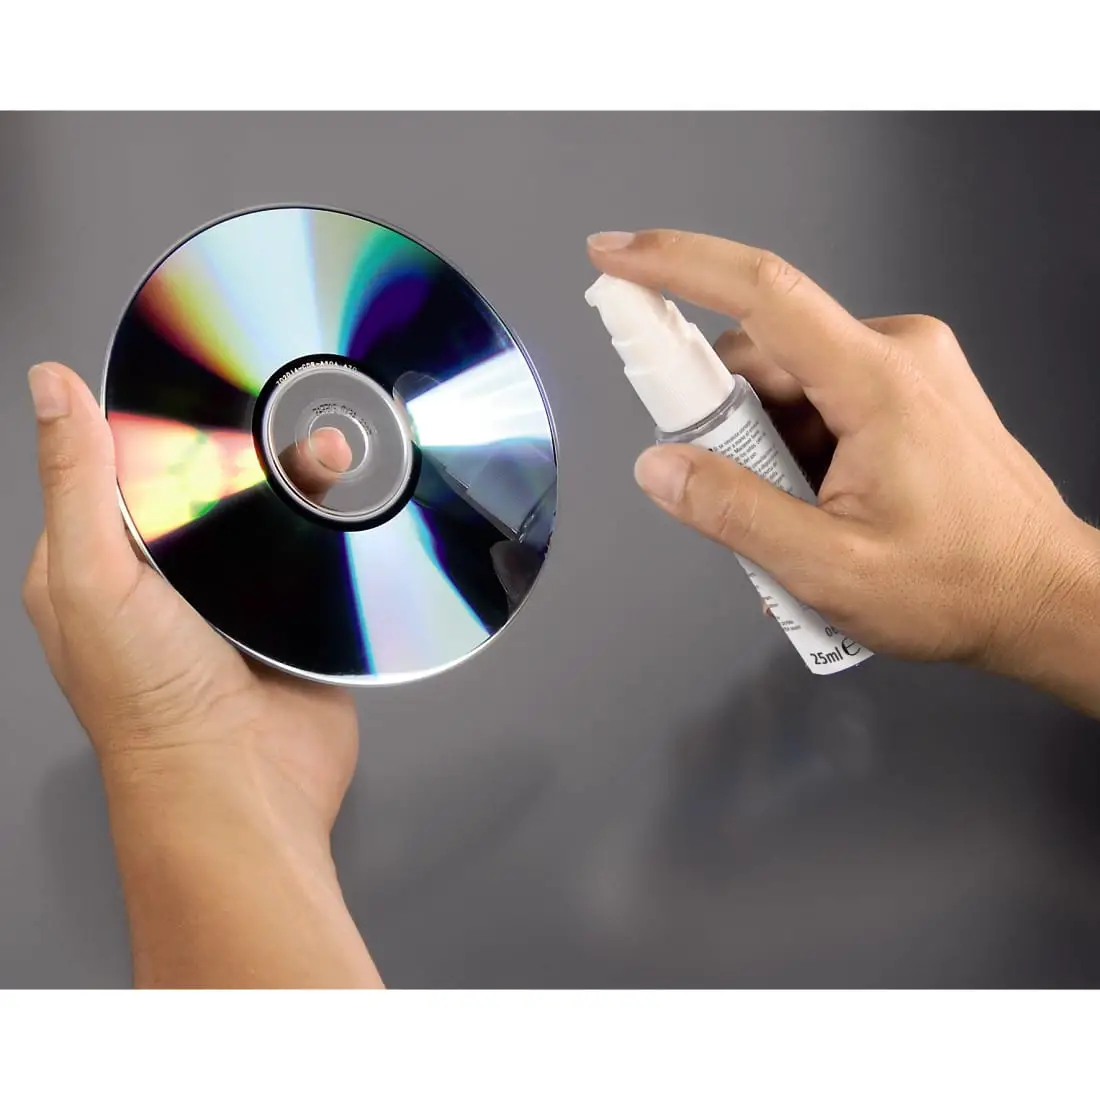 Disc Repair KIT Fix &  Clean Up Your Faulty Scratched Game Discs / DVDs ...